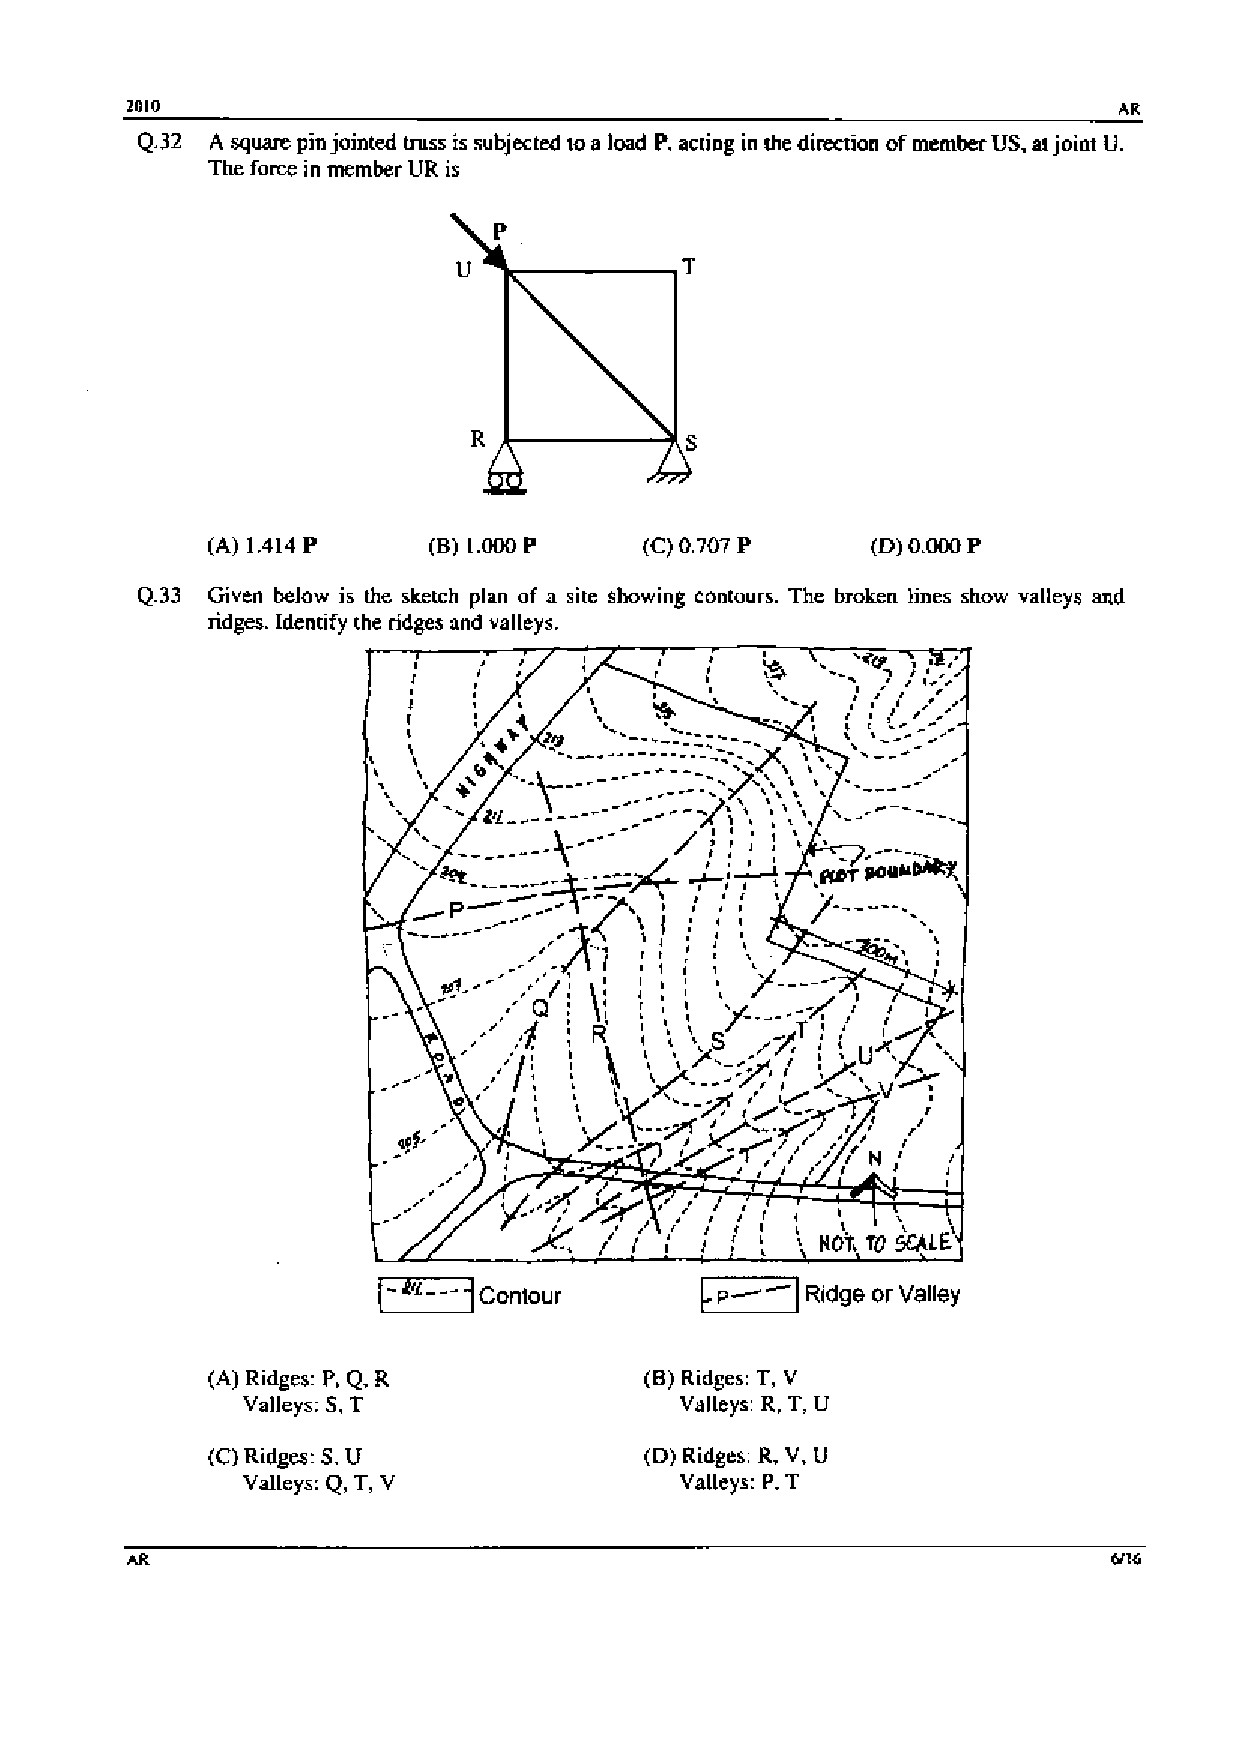 GATE Exam Question Paper 2010 Architecture and Planning 6